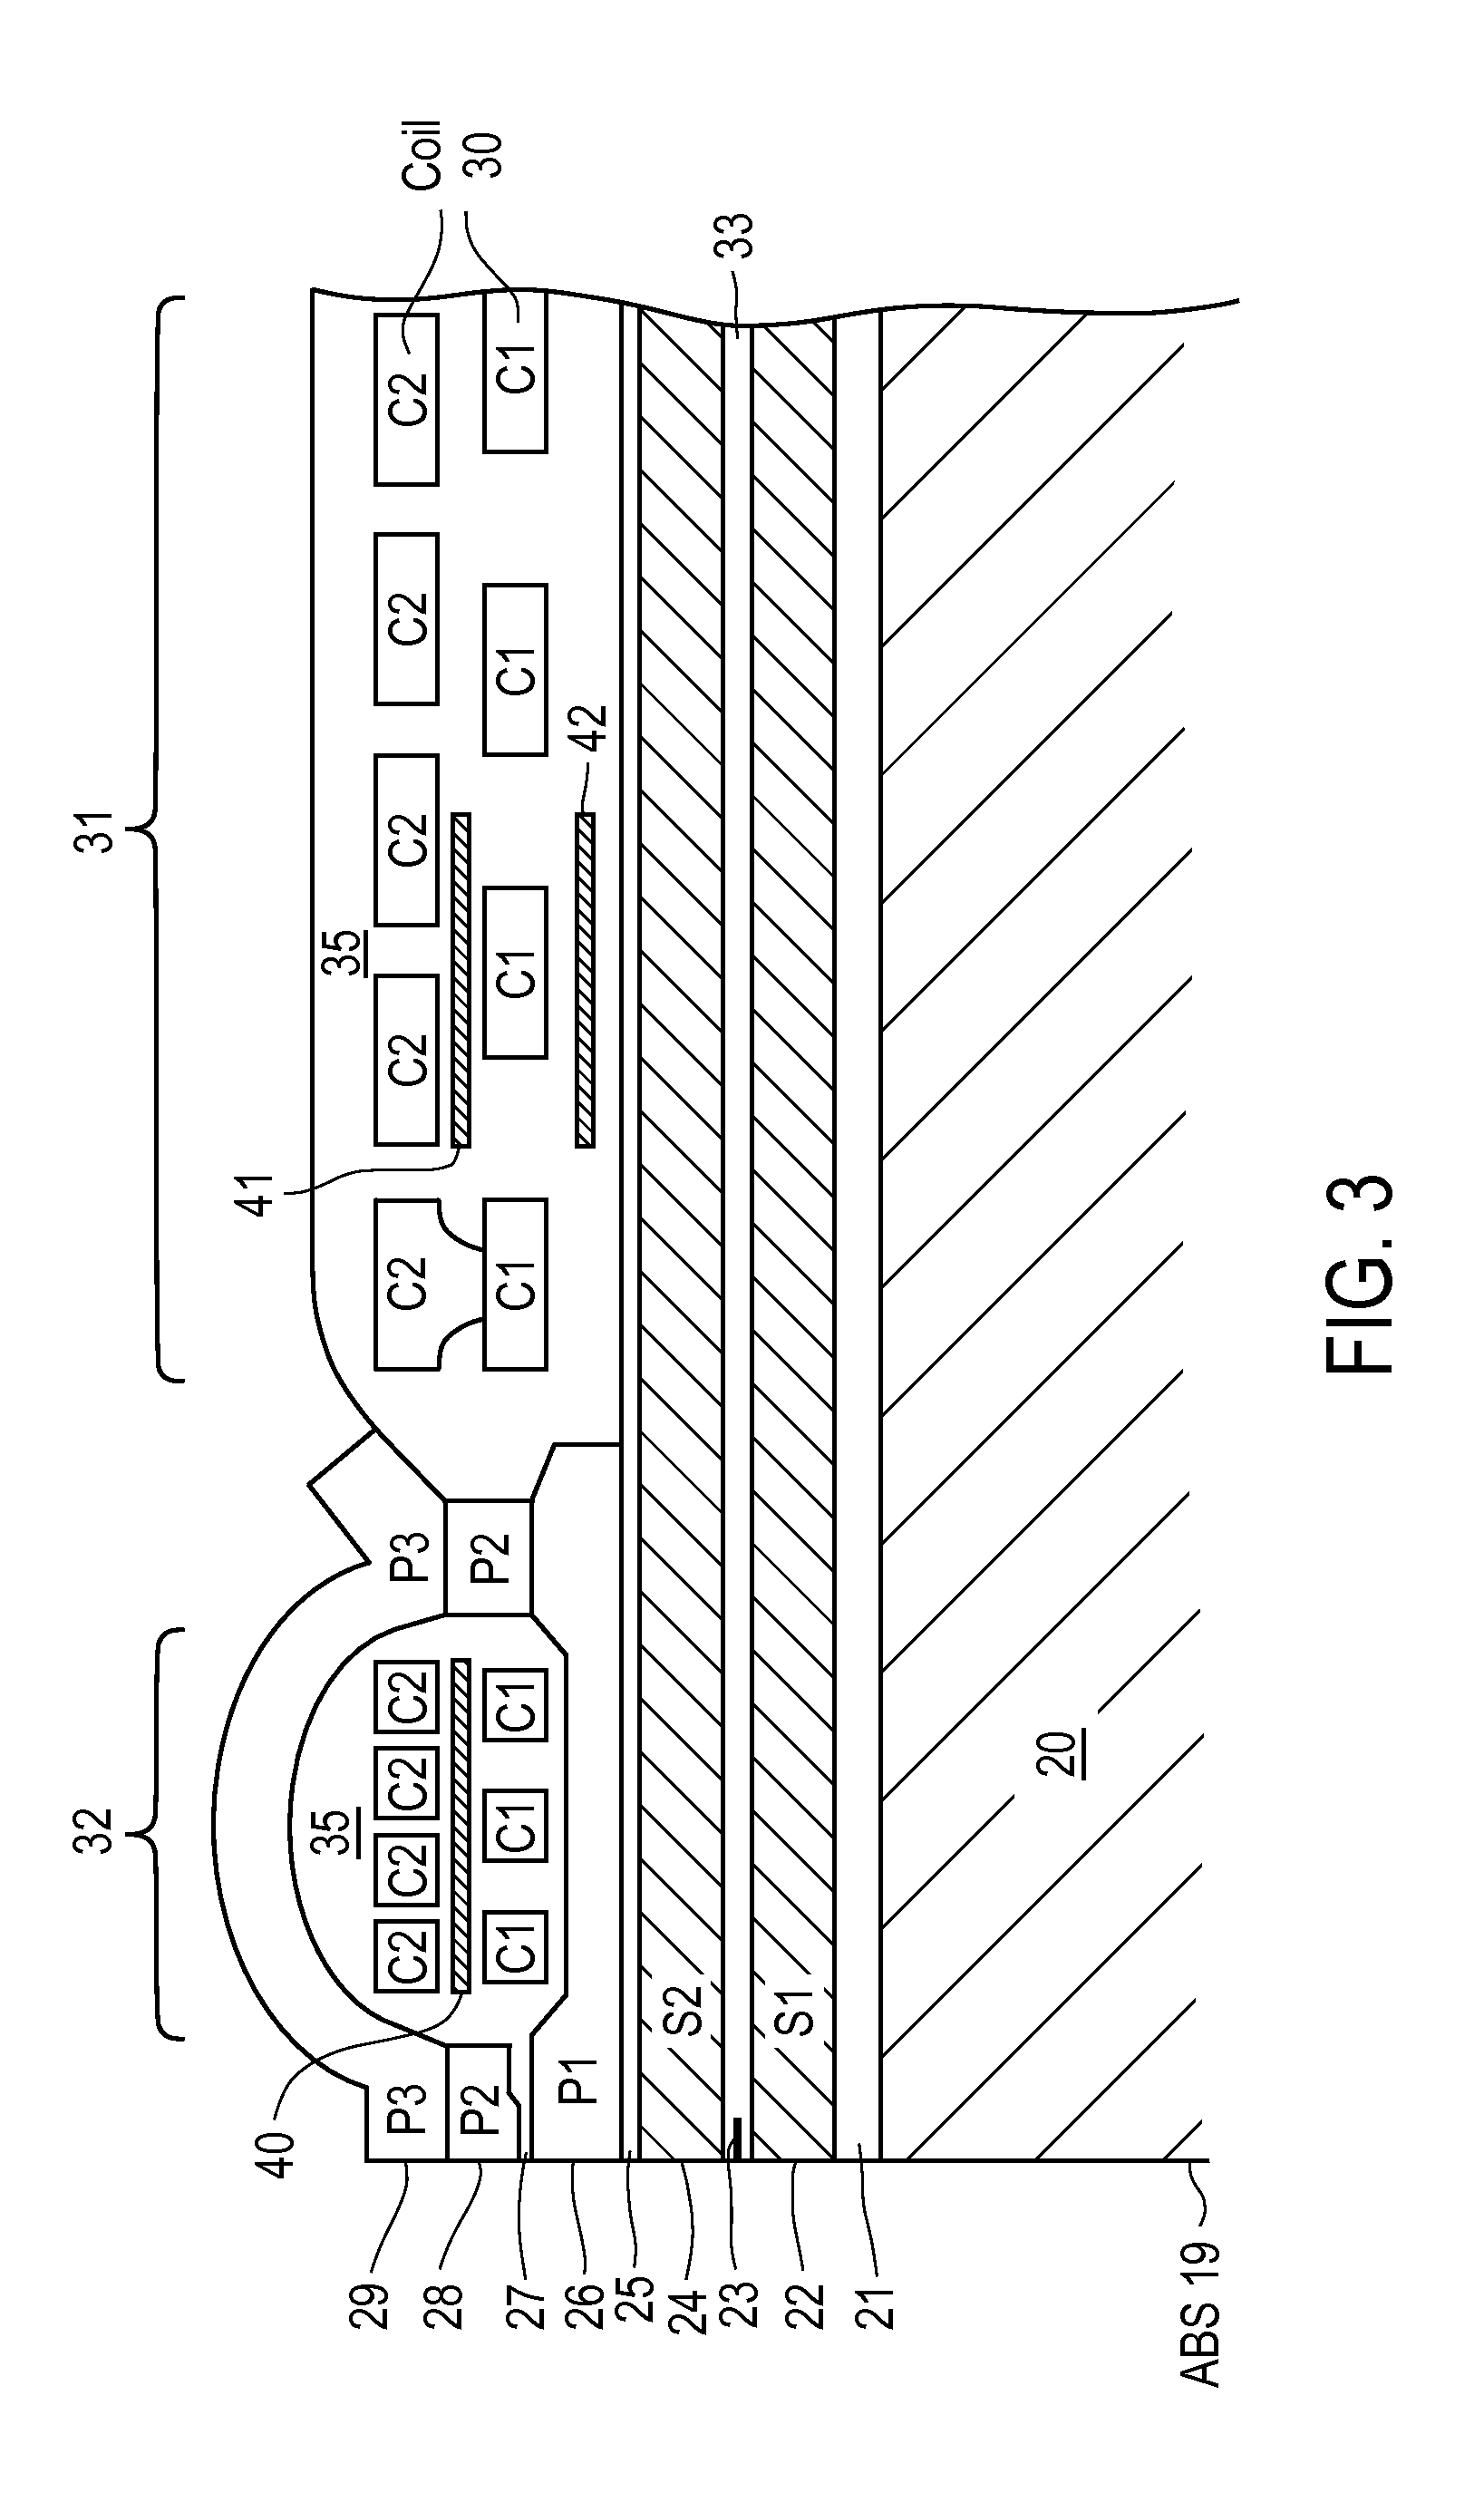 Perpendicular magnetic recording head with dynamic flying height heating element disposed below turns of a write coil